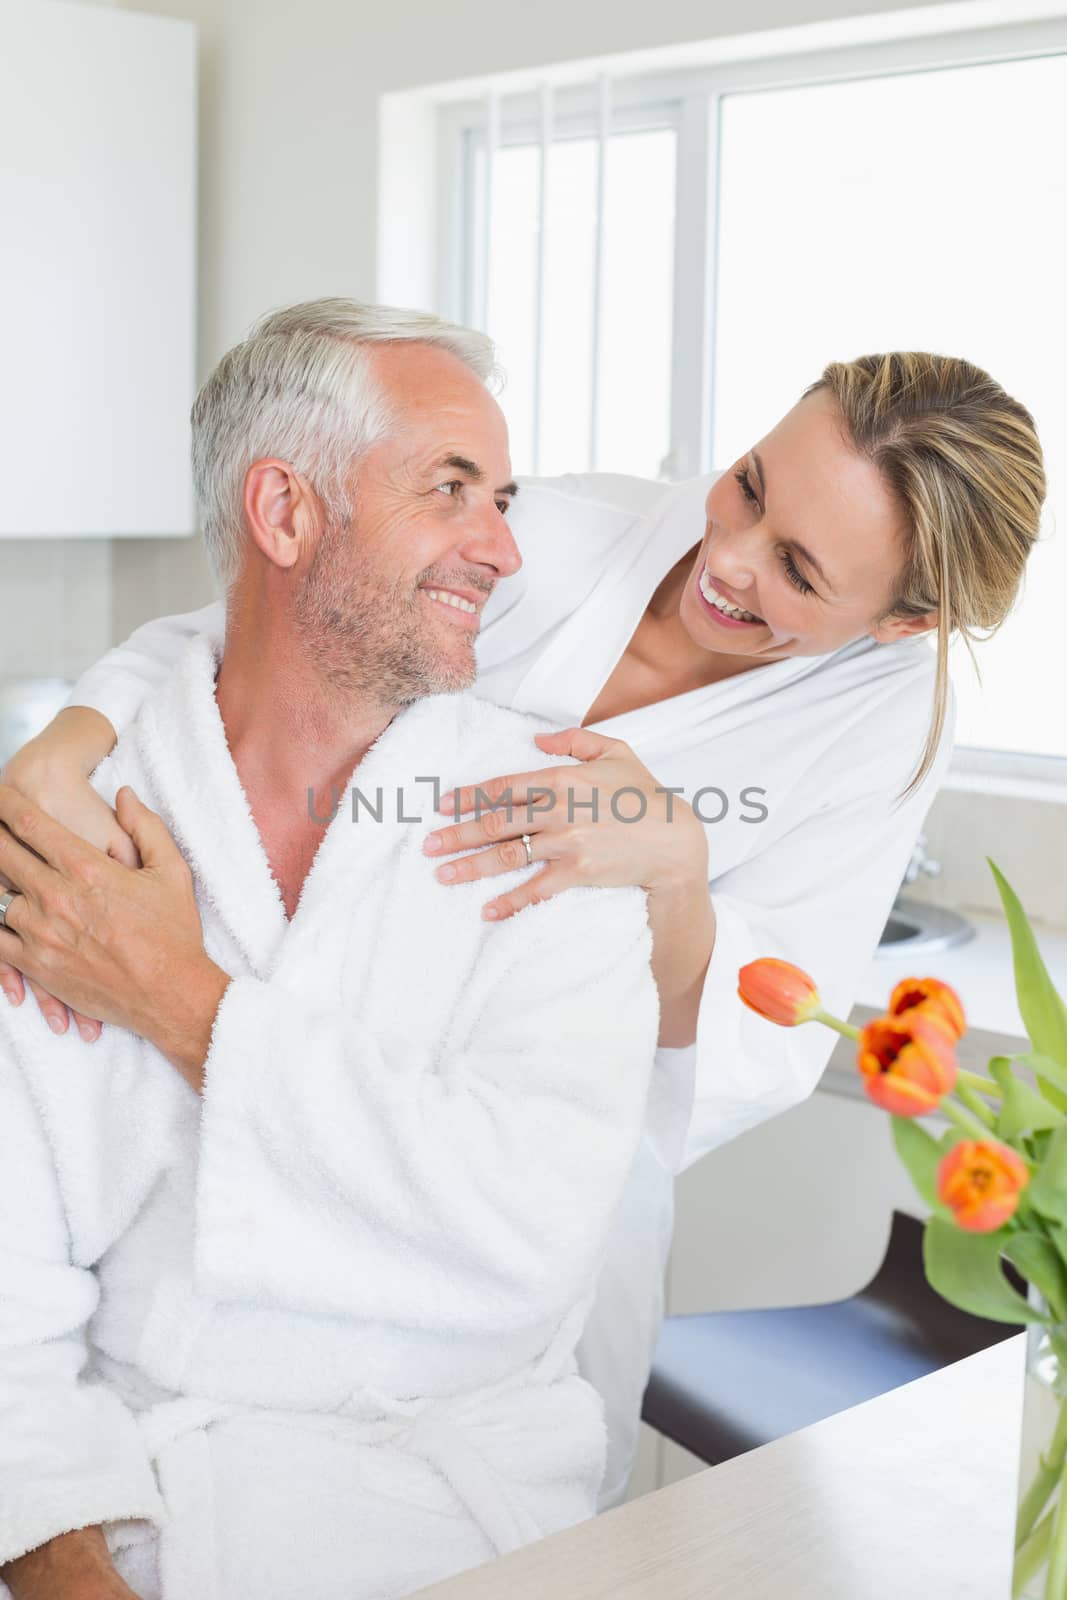 Happy couple embracing in the morning at home in the kitchen